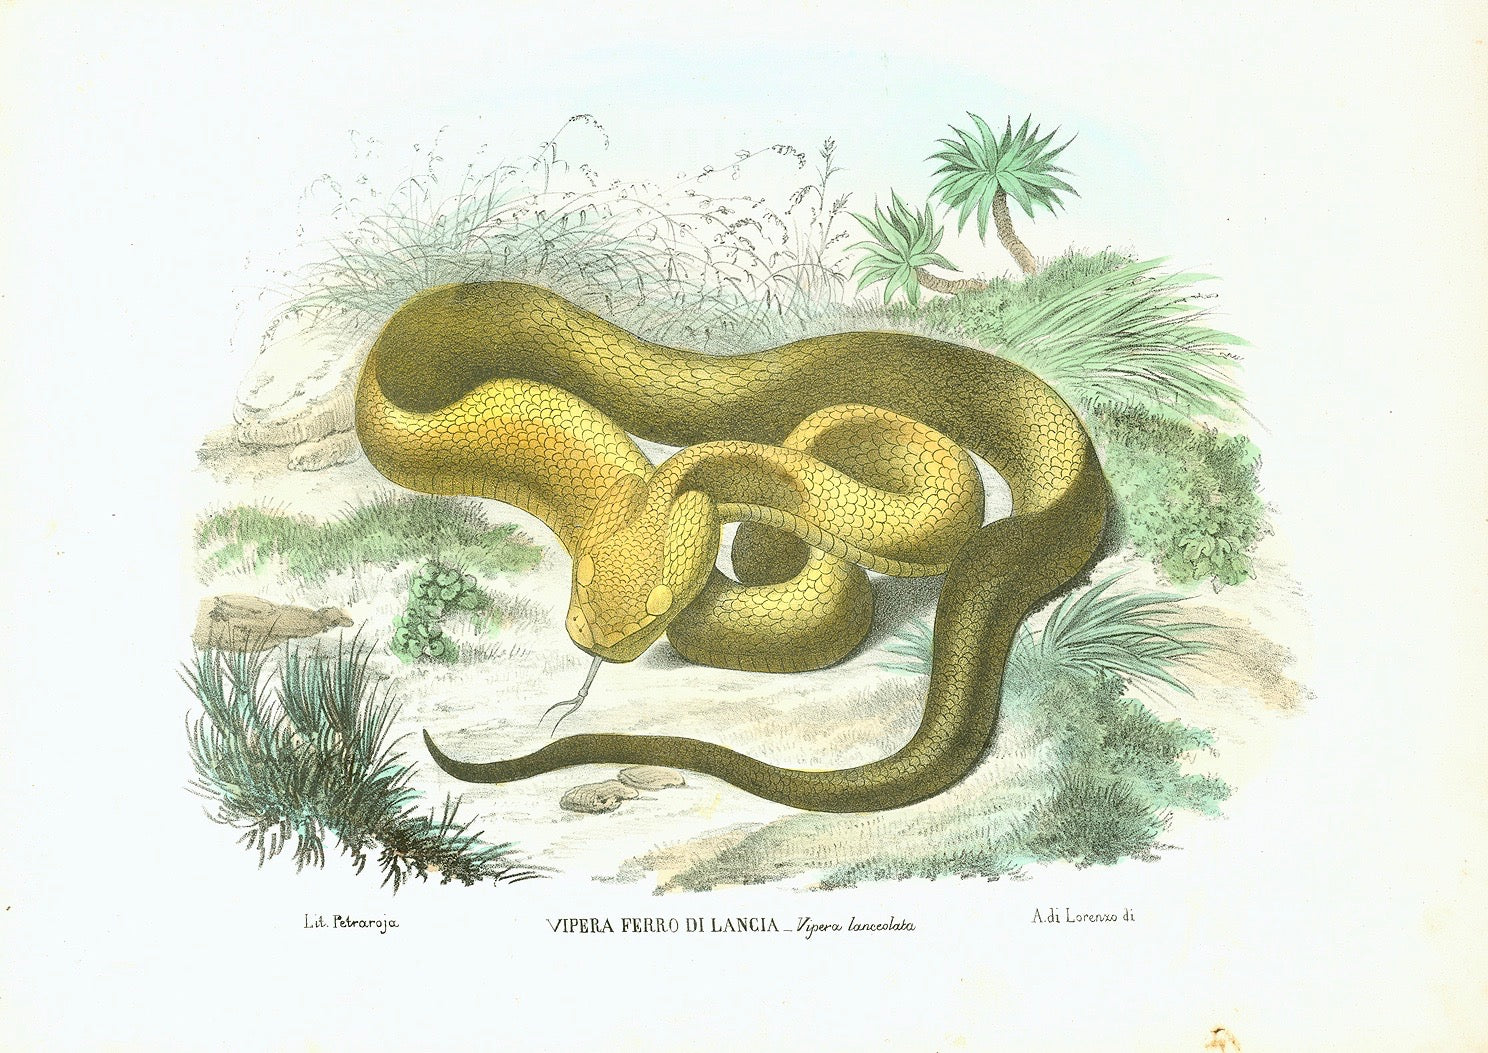   "Vipera Ferro Di Lancia - Vipera lanceolata"   Here is a rare and beautiful lithograph from the "Atlante Zoologico Popolare" published in Naples (1863) by Giovanni Boschi. The lithograph was made by Raimondo Petraroja. This work comprised eight volumes of most known animals, even some that are now extinct. The books were published from 1863-1879.   In the lower margin is the lithographers blind stamp. The original hand coloring is superb.  Fine lithograph by Raimondo Petraroja after Rispoli. Original hand